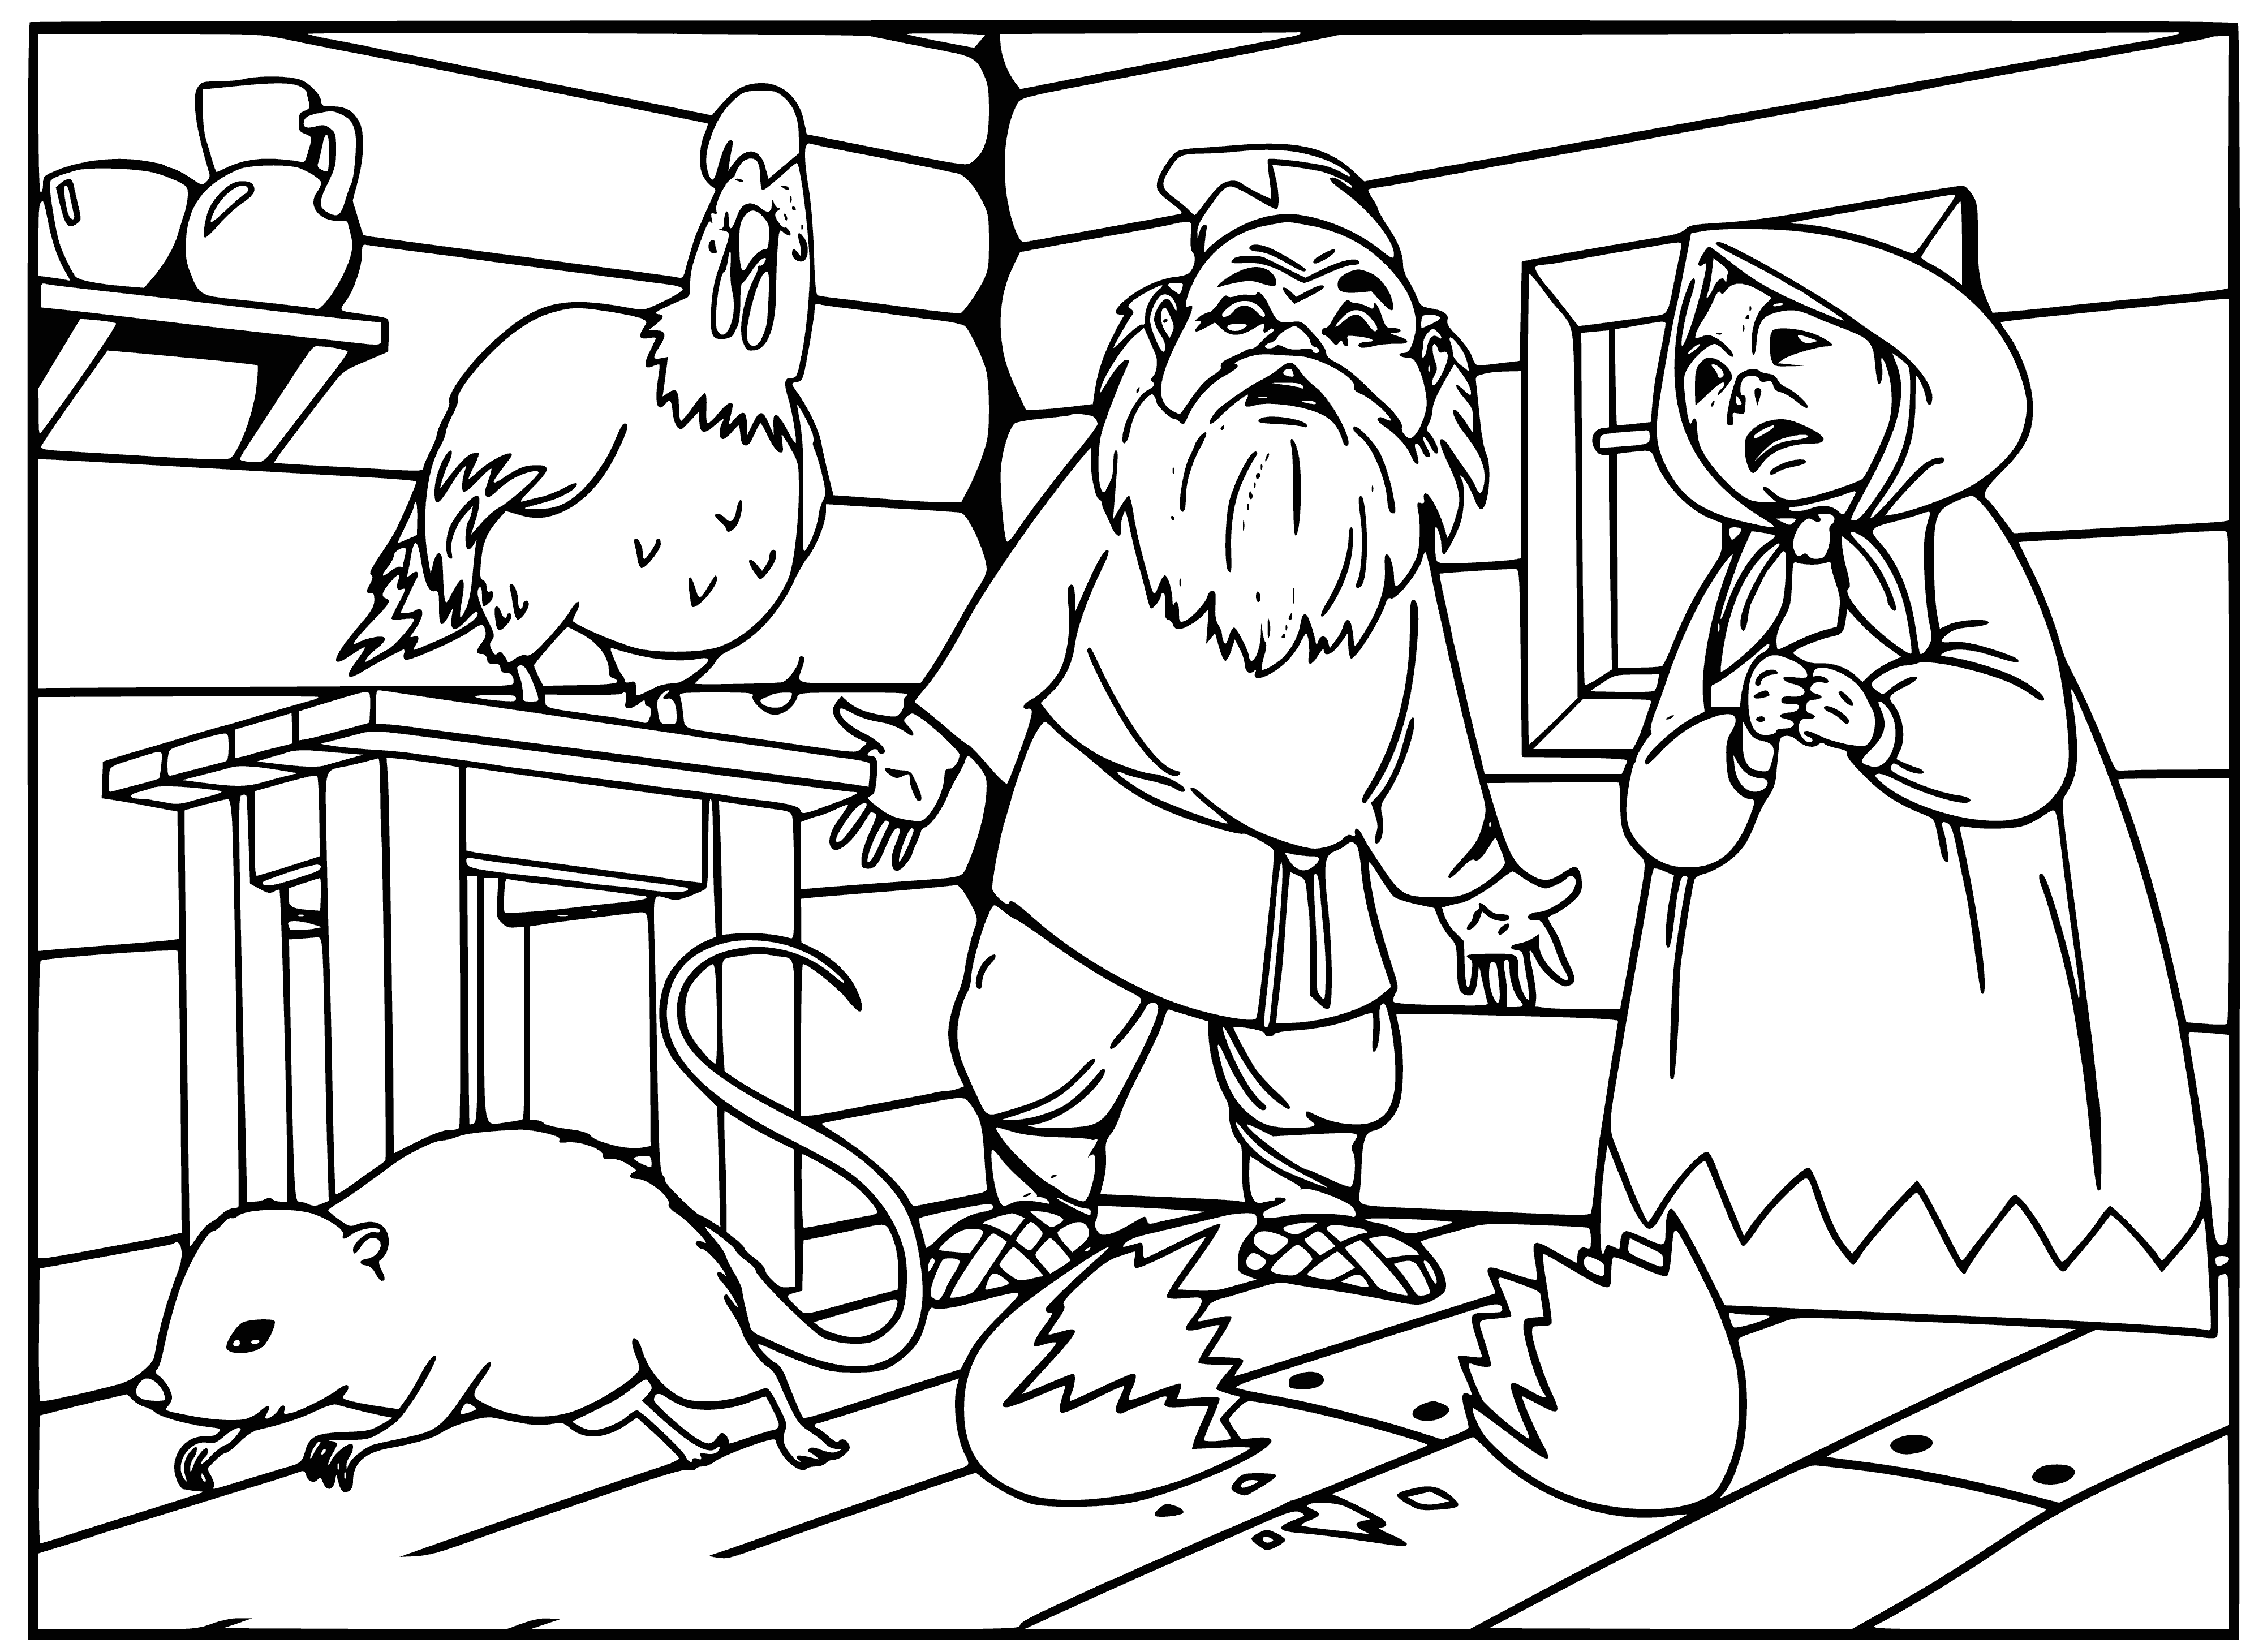 The testicle fell and shattered coloring page